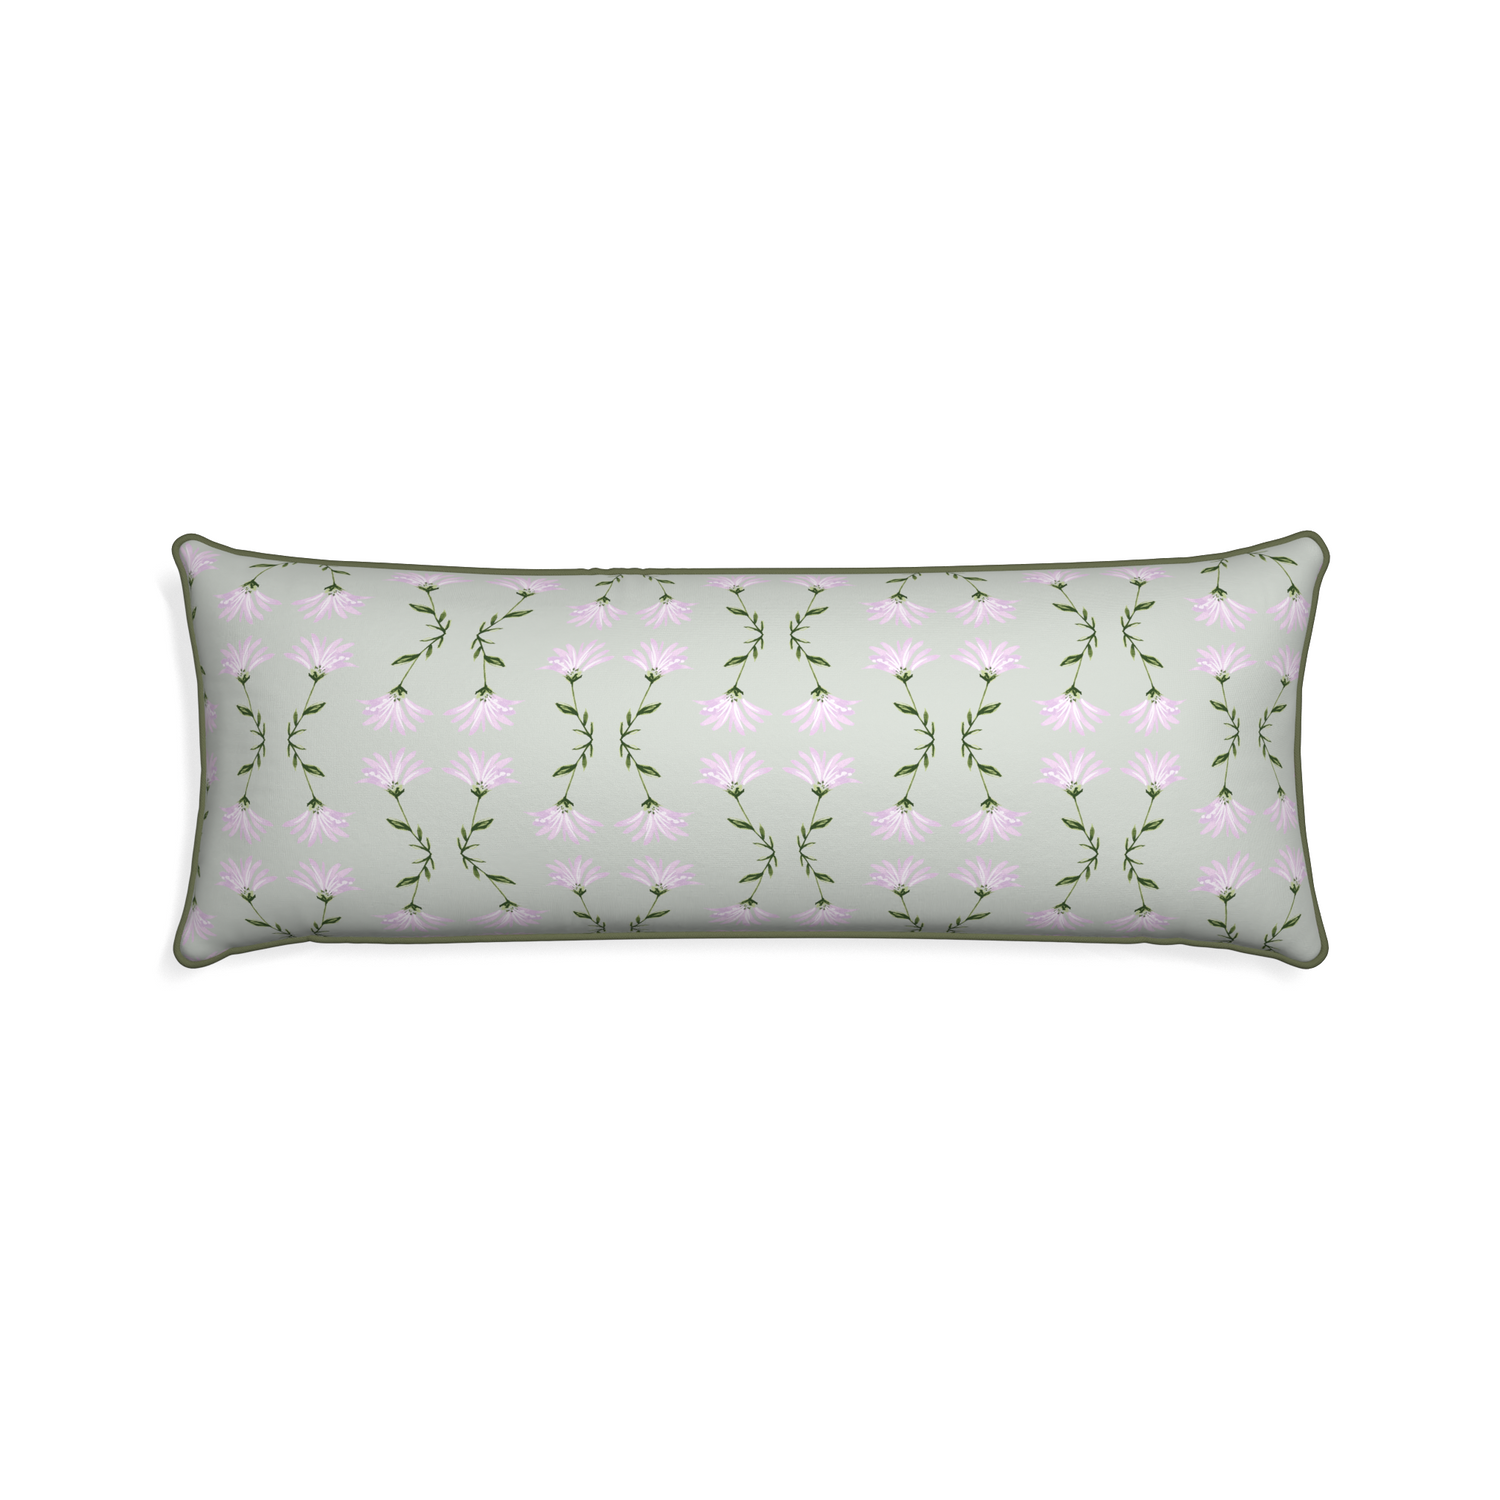 Xl-lumbar marina sage custom pillow with f piping on white background